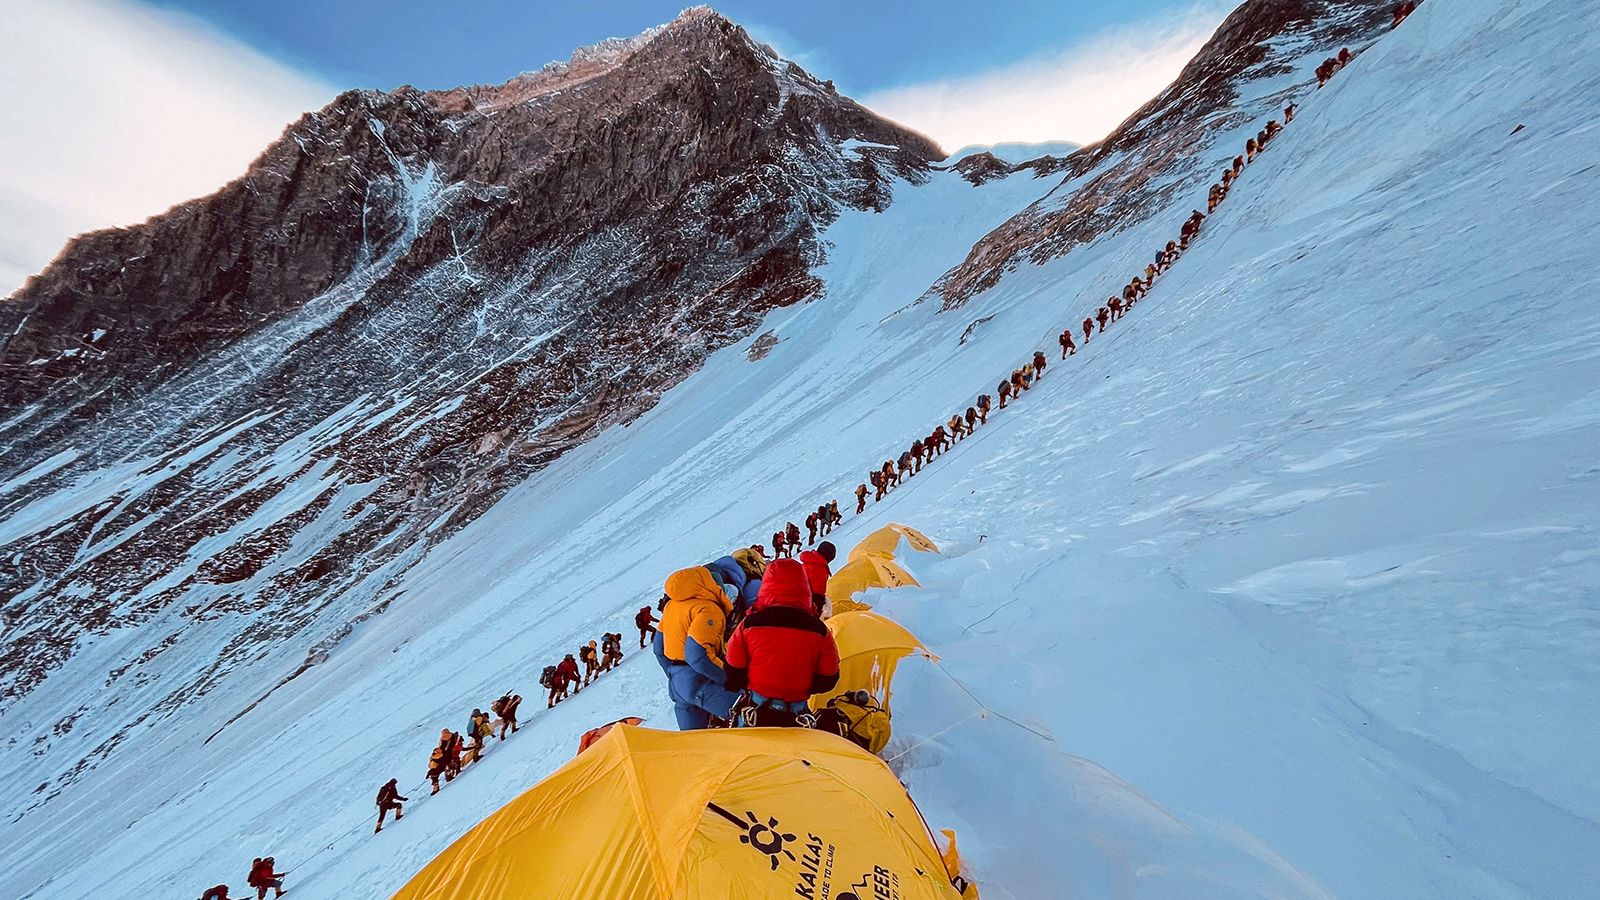 This photograph taken on May 31, 2021 shows mountaineers lined up as they climb a slope during their ascent to summit Mount Everest.